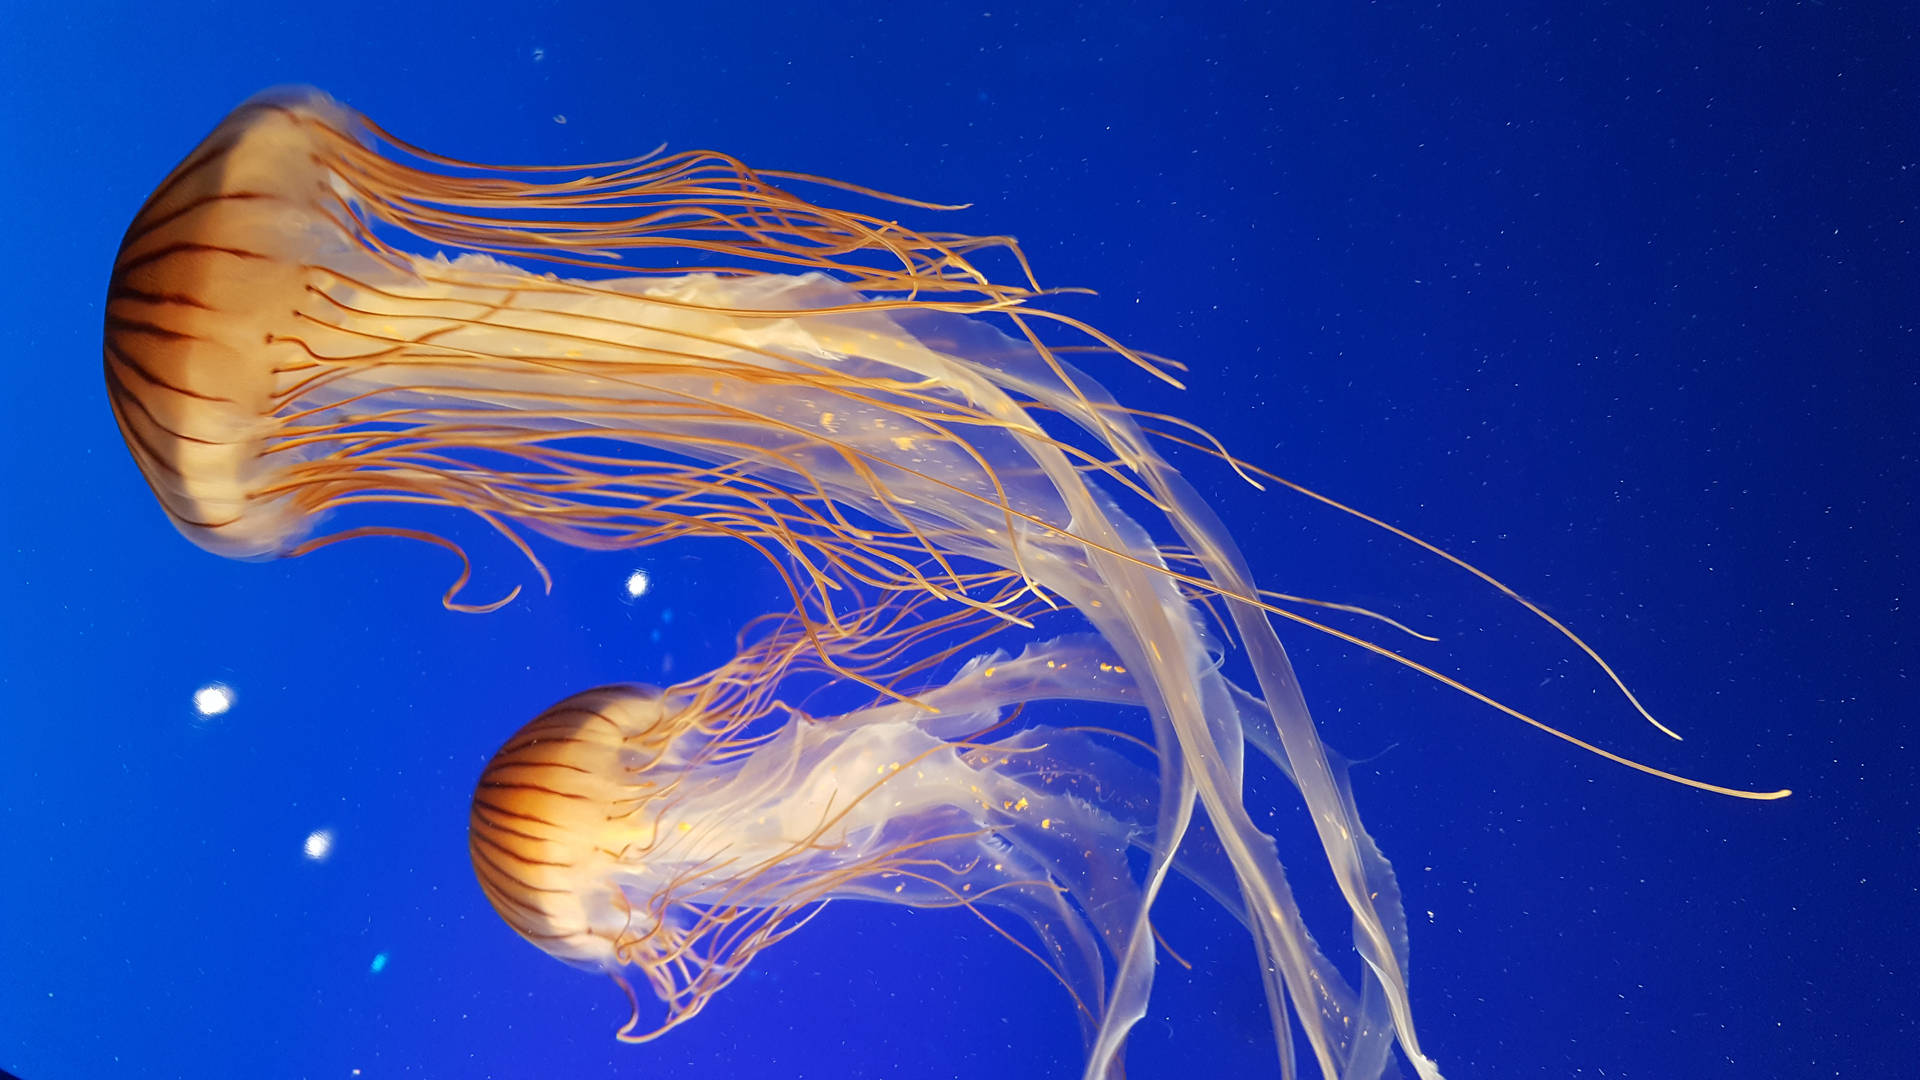 Jellyfish 5312X2988 Wallpaper and Background Image